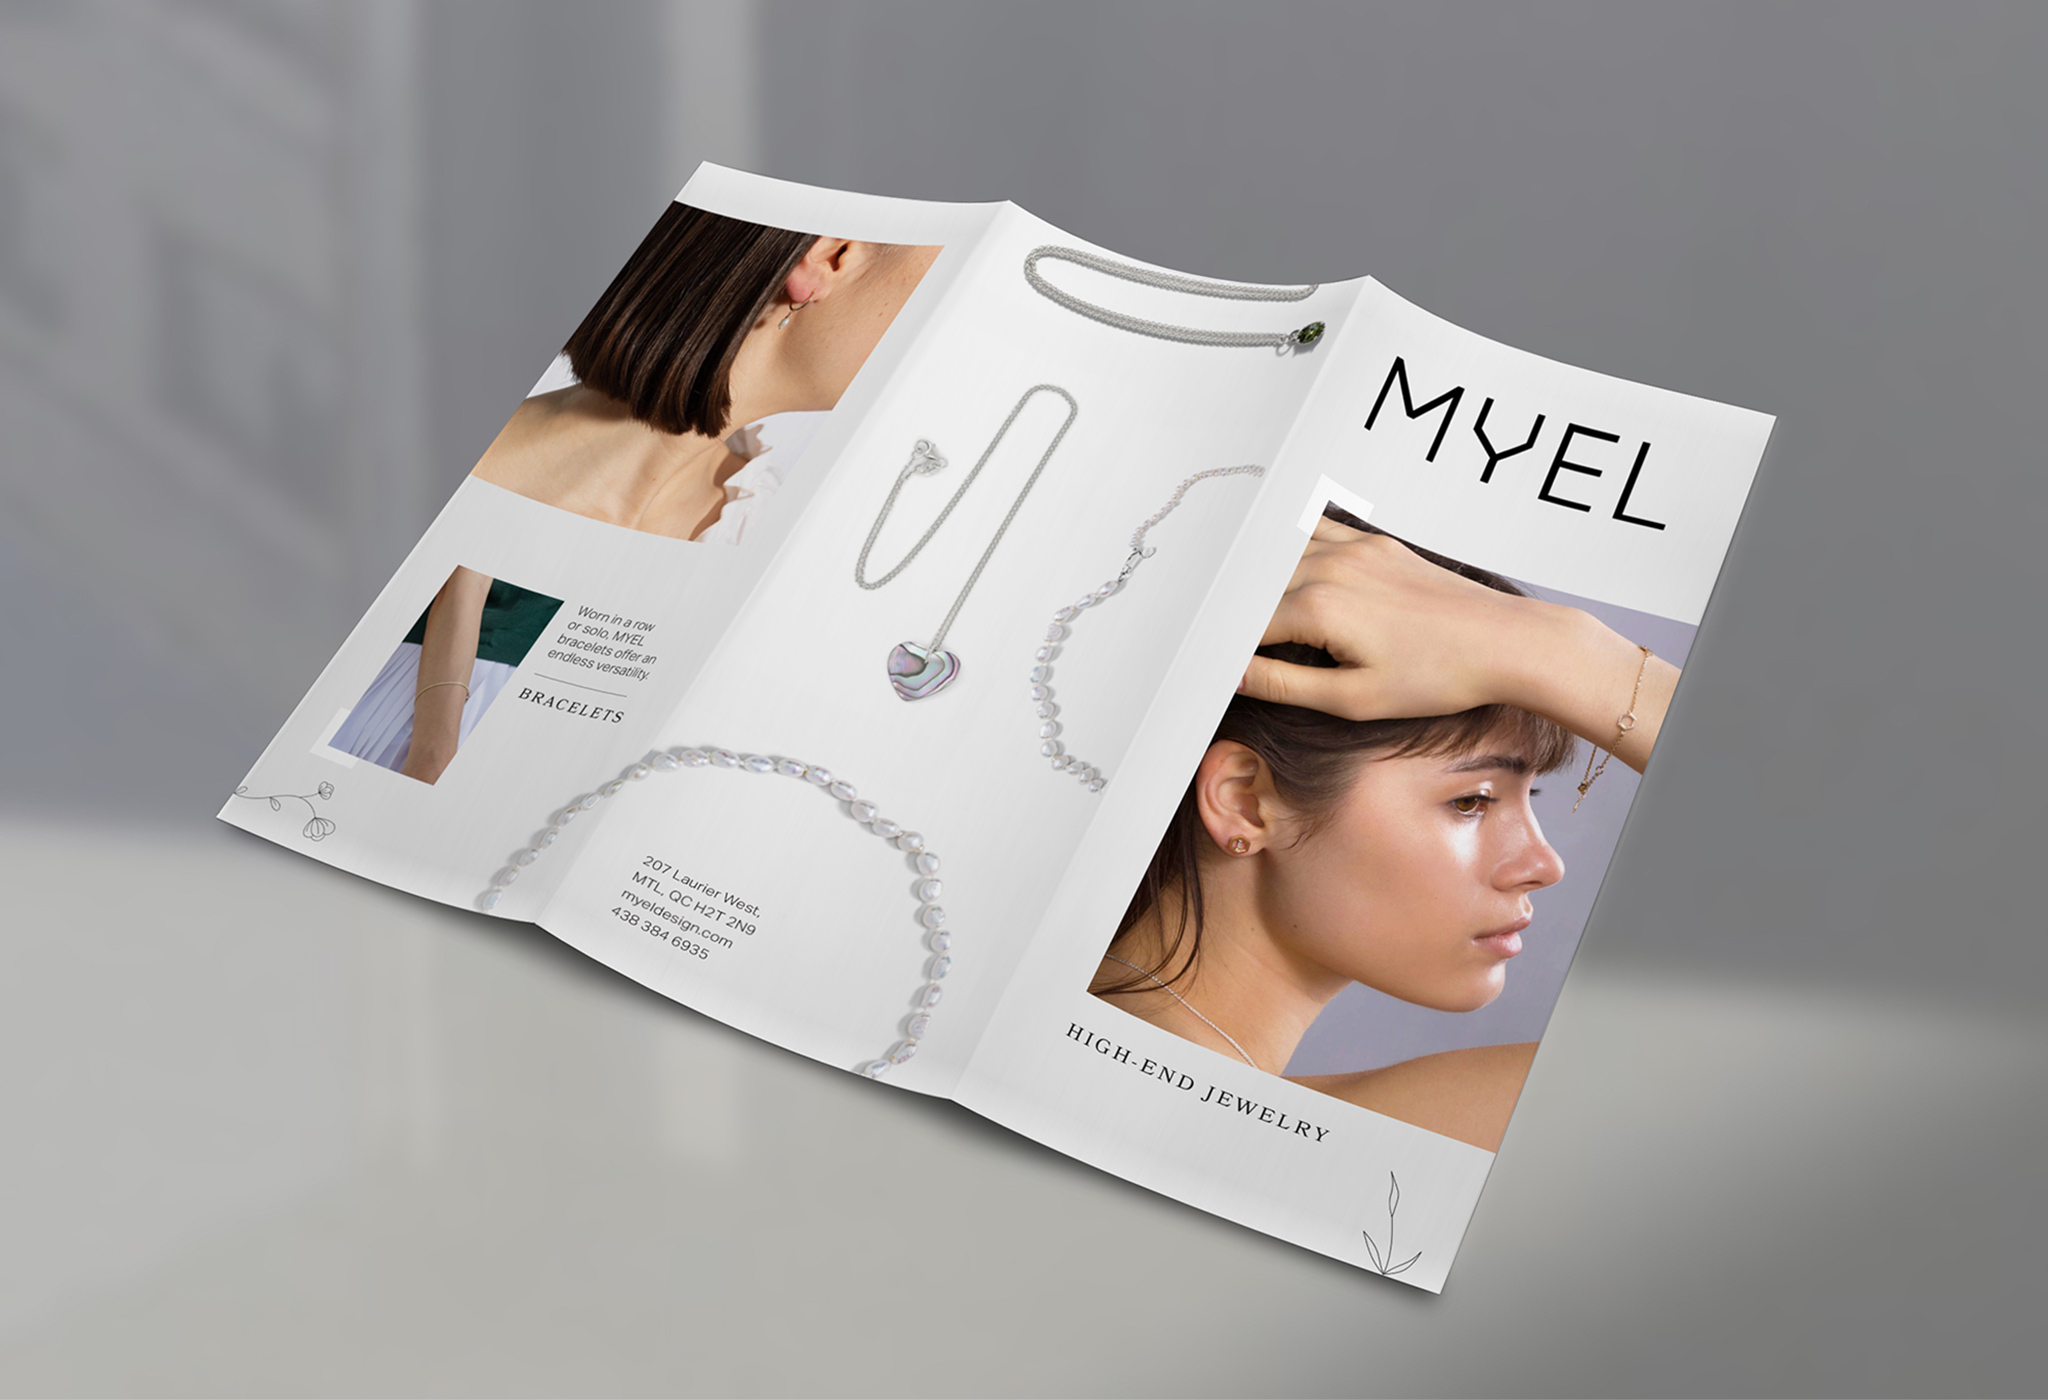 Outside view of the Myel Jewelry tri-fold brochure print I designed. This side displays the cover, several pieces of jewelry on their own, and some extra product shots and descriptions.